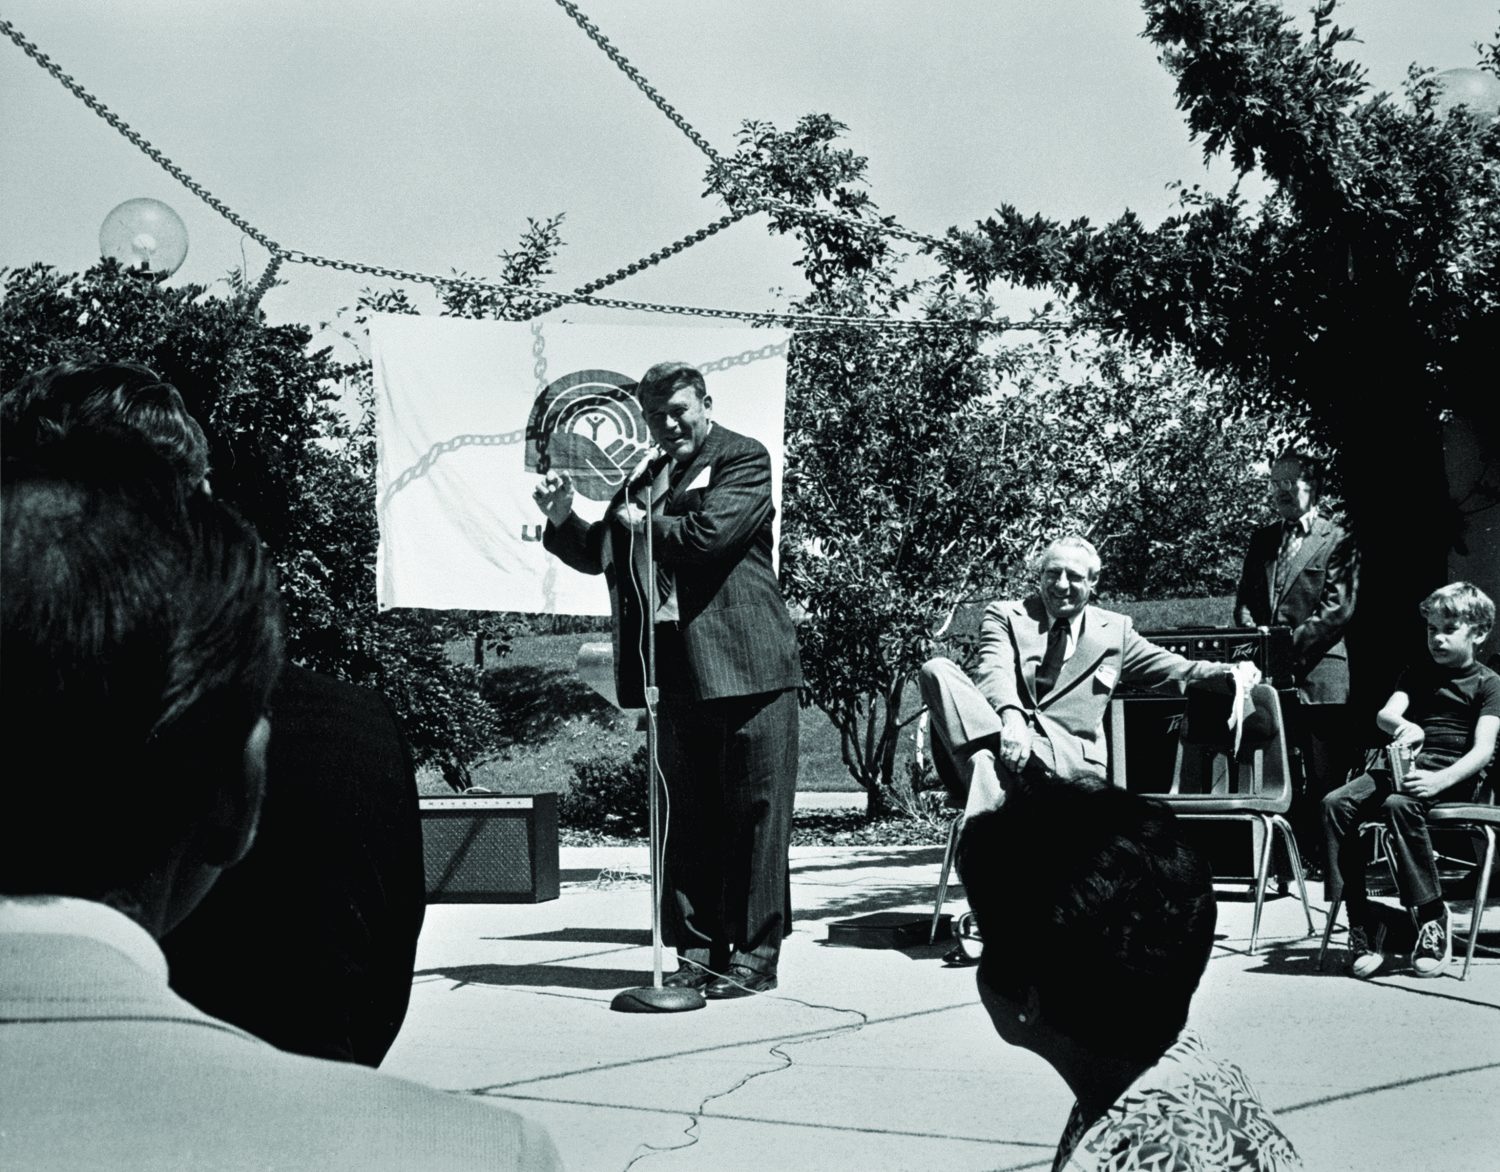 Bill Hewlett on stage at a Santa Clara County United Way fundraising event in 1975.